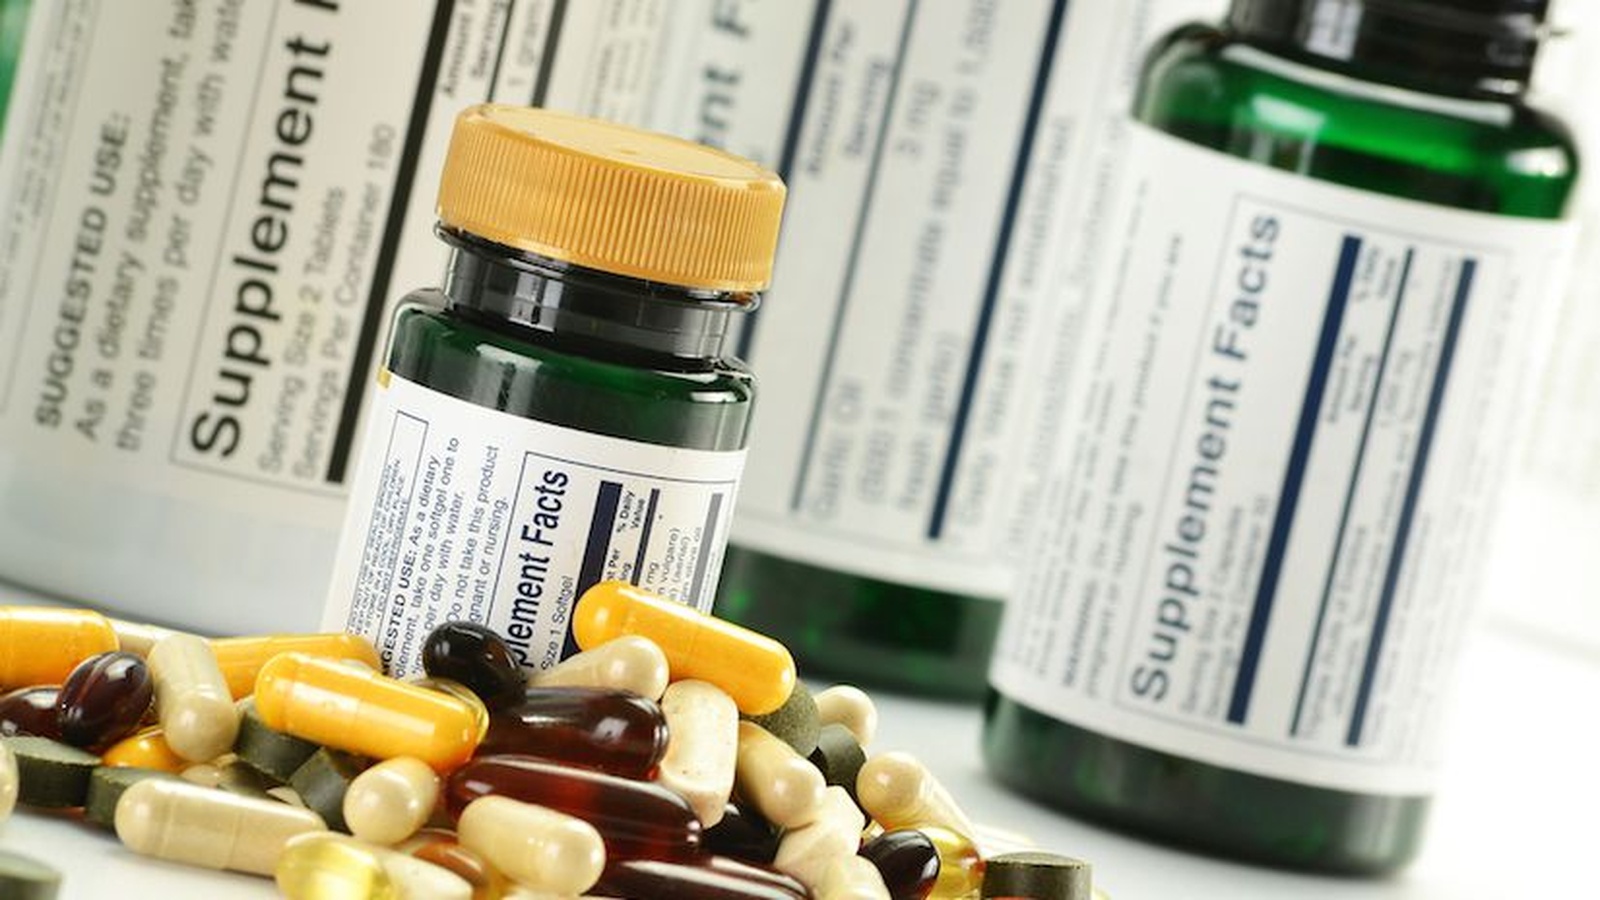 5 Ways to Tell If Your Vitamins are Real or Fake